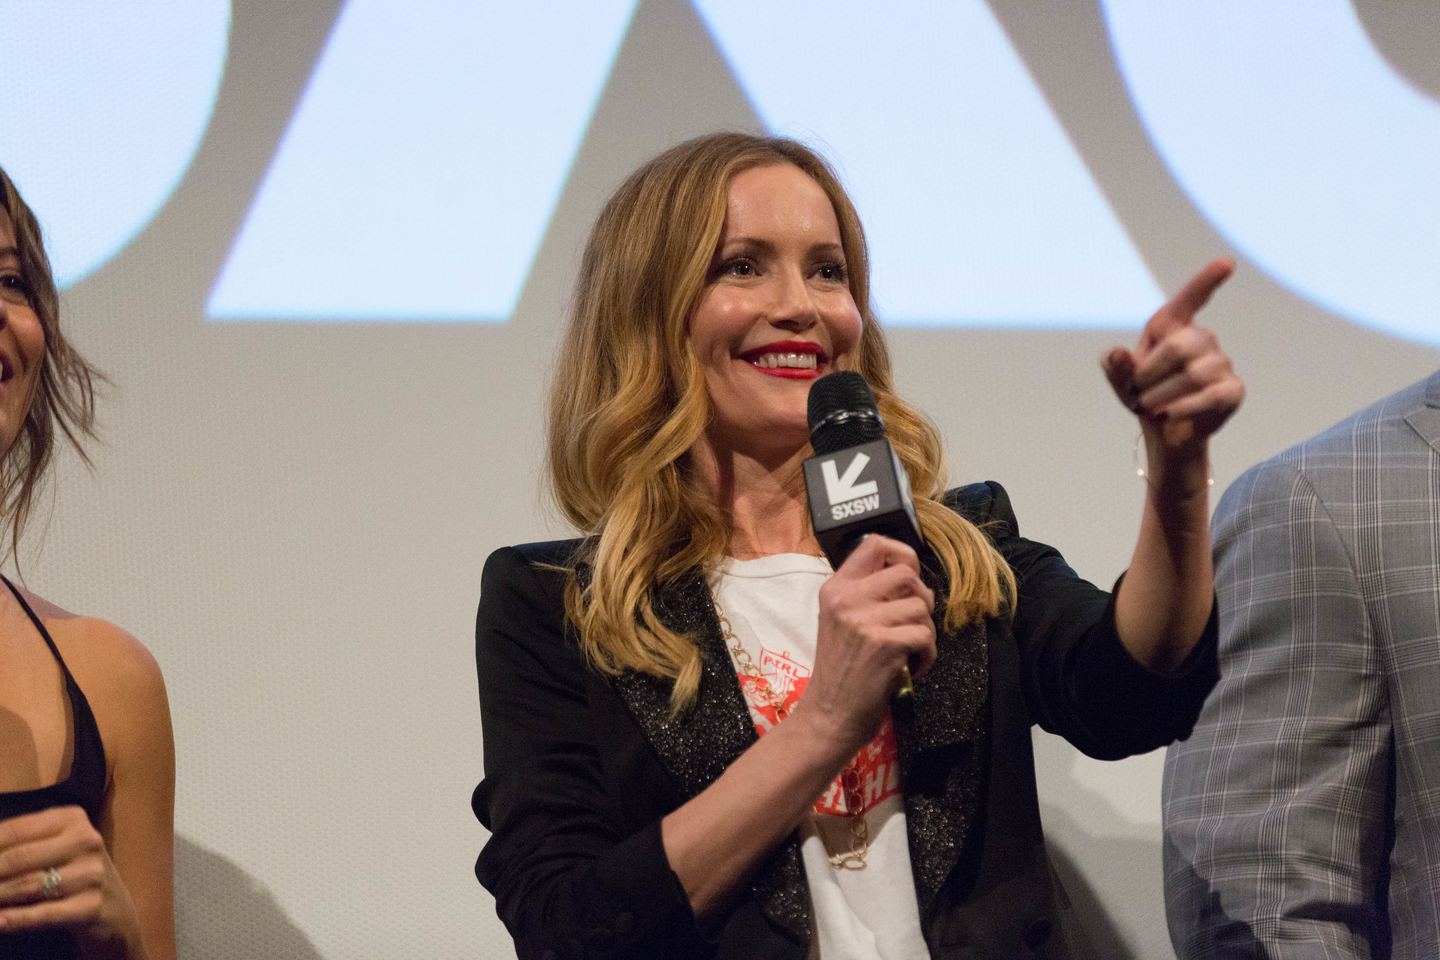 Leslie Mann at the Blockers World Premiere. Photo by Jessy Ann Huff